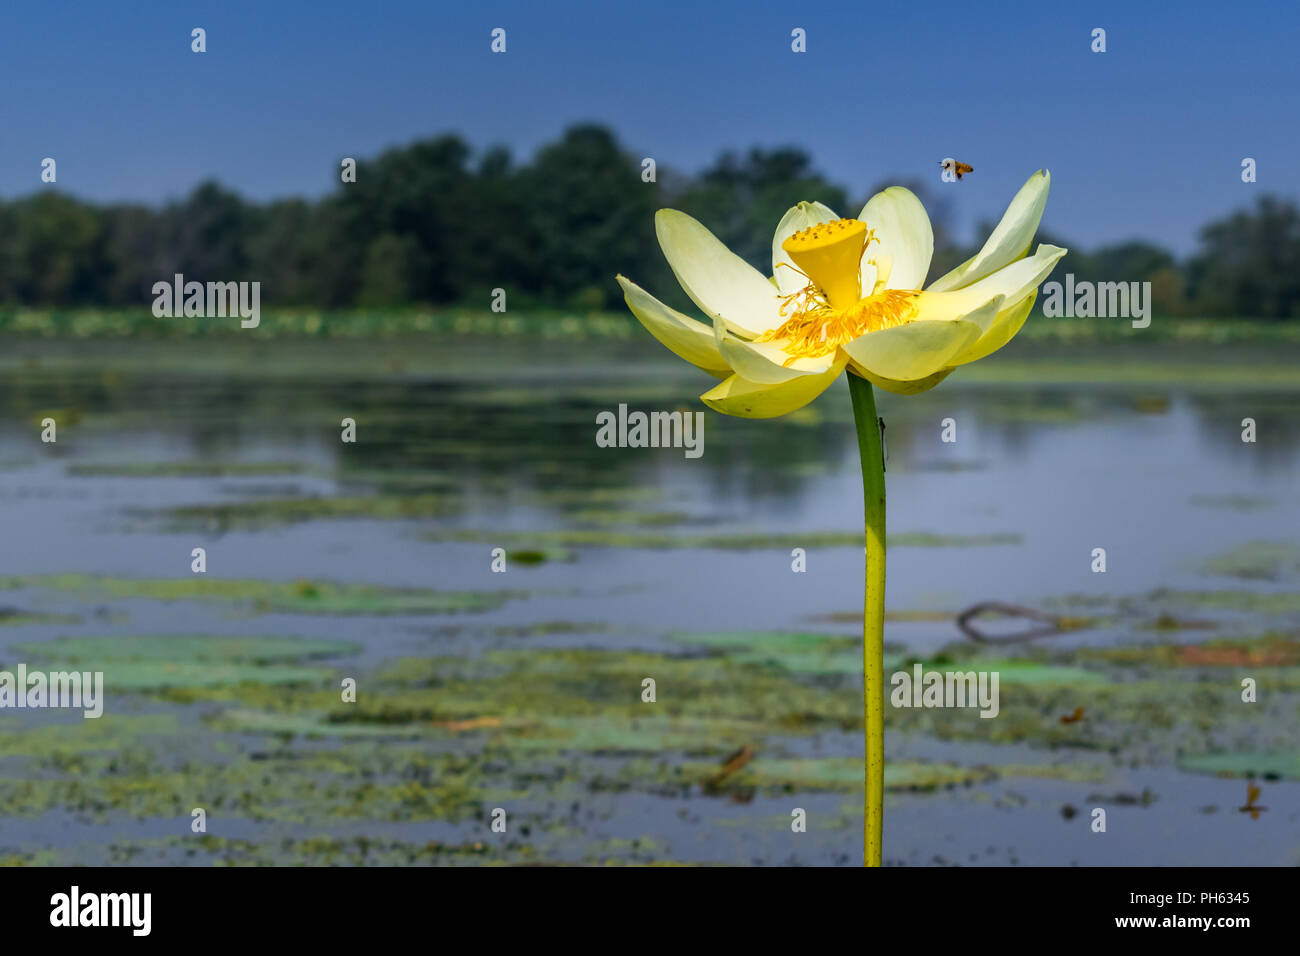 Coming in for a landing! Water Lily in bloom. Stock Photo